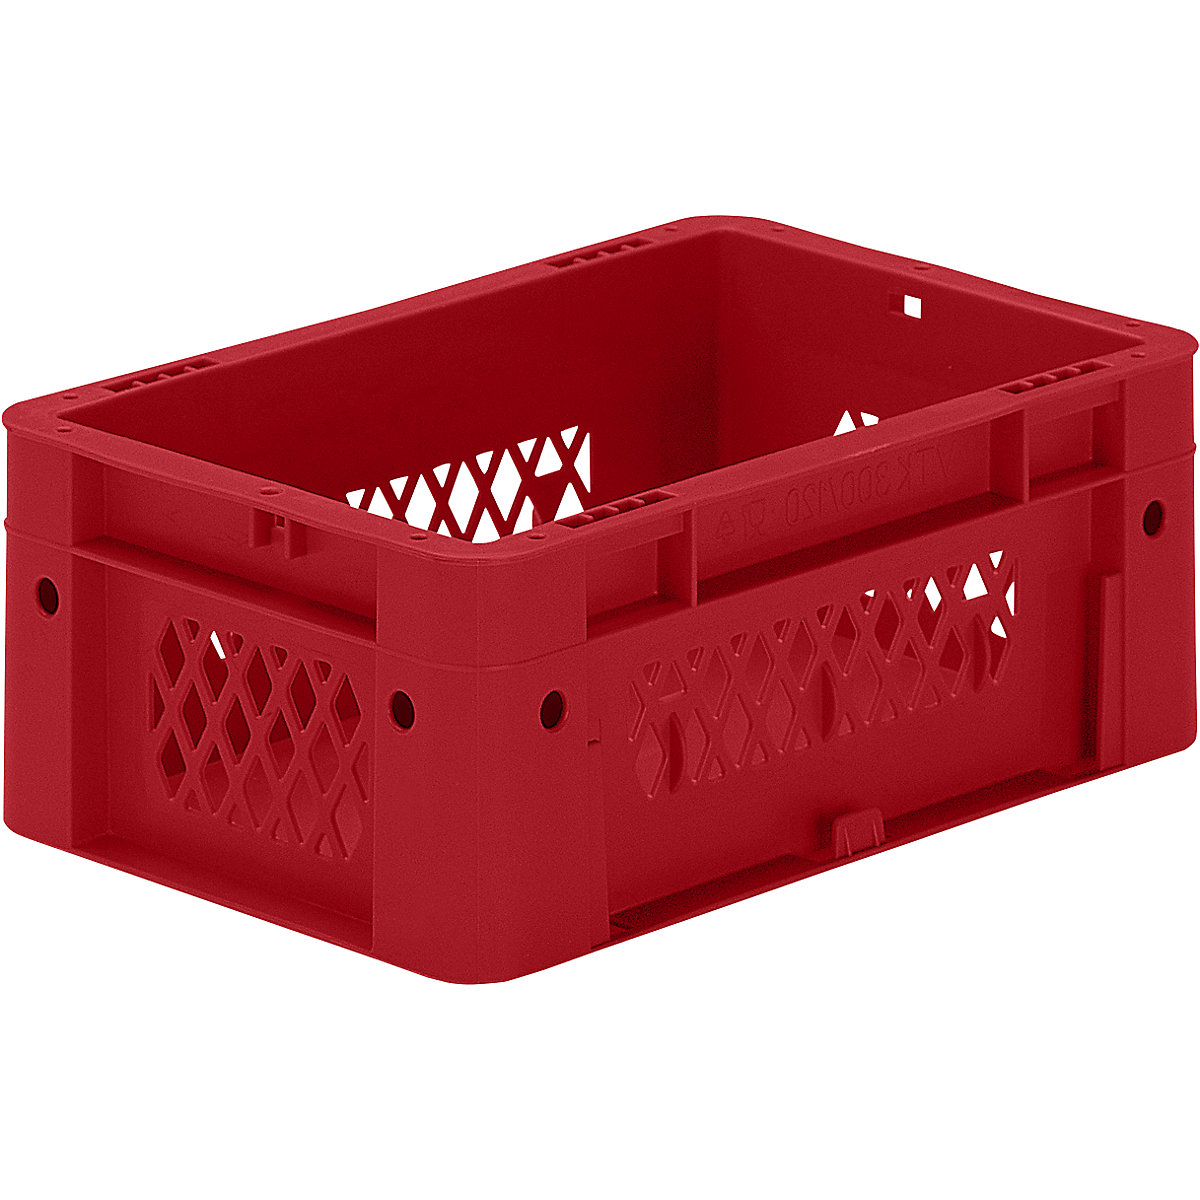 Heavy duty Euro container, polypropylene, capacity 4.1 l, LxWxH 300 x 200 x 120 mm, perforated walls, solid base, red, pack of 8-3